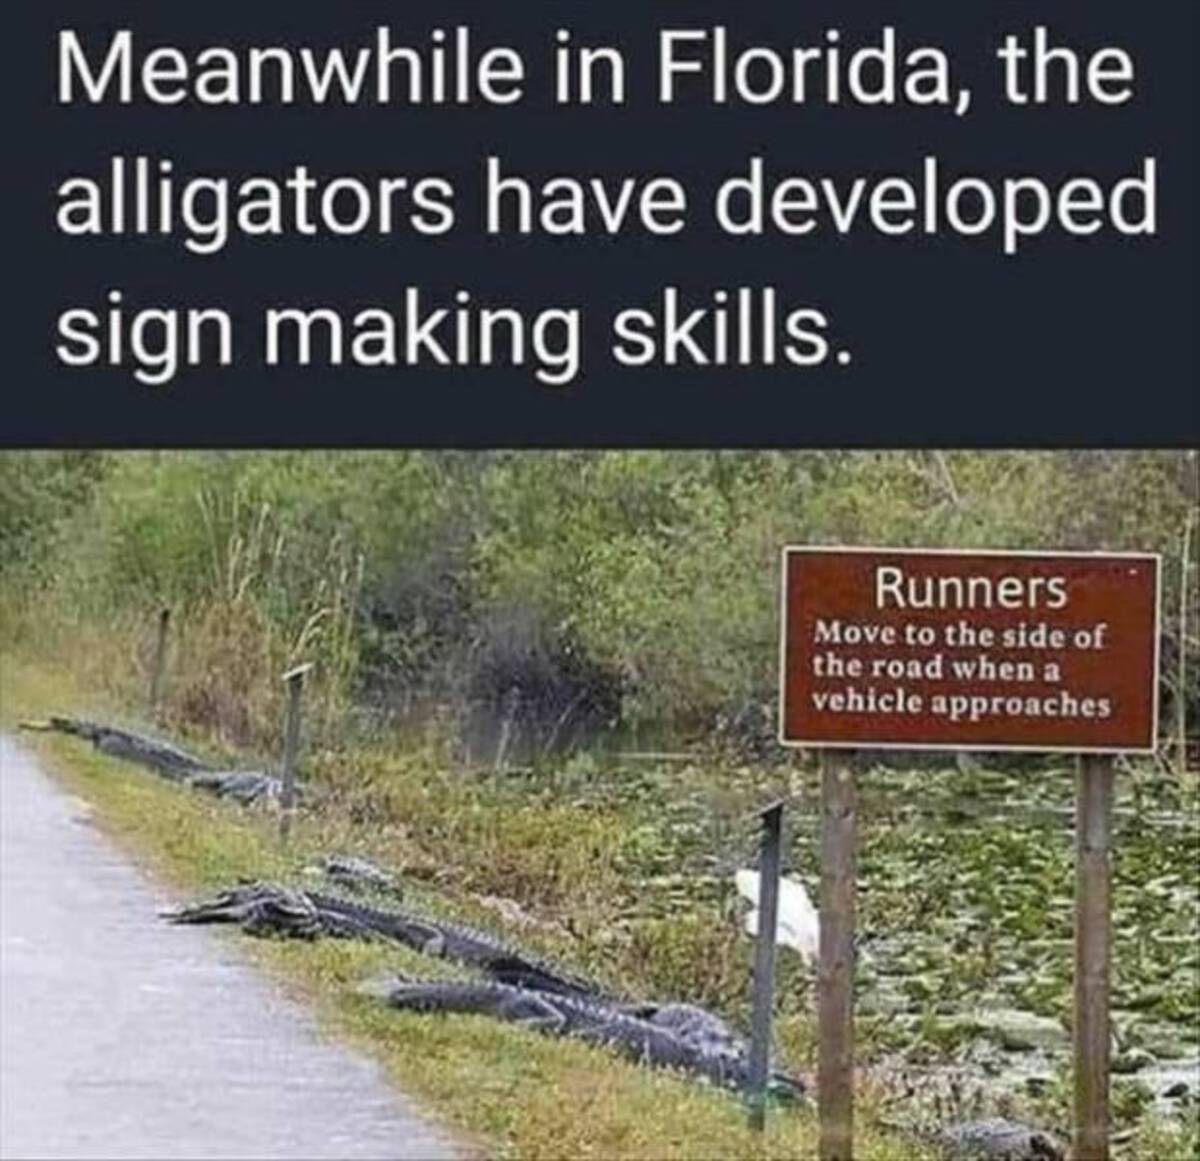 grass - Meanwhile in Florida, the alligators have developed sign making skills. Runners Move to the side of the road when a vehicle approaches